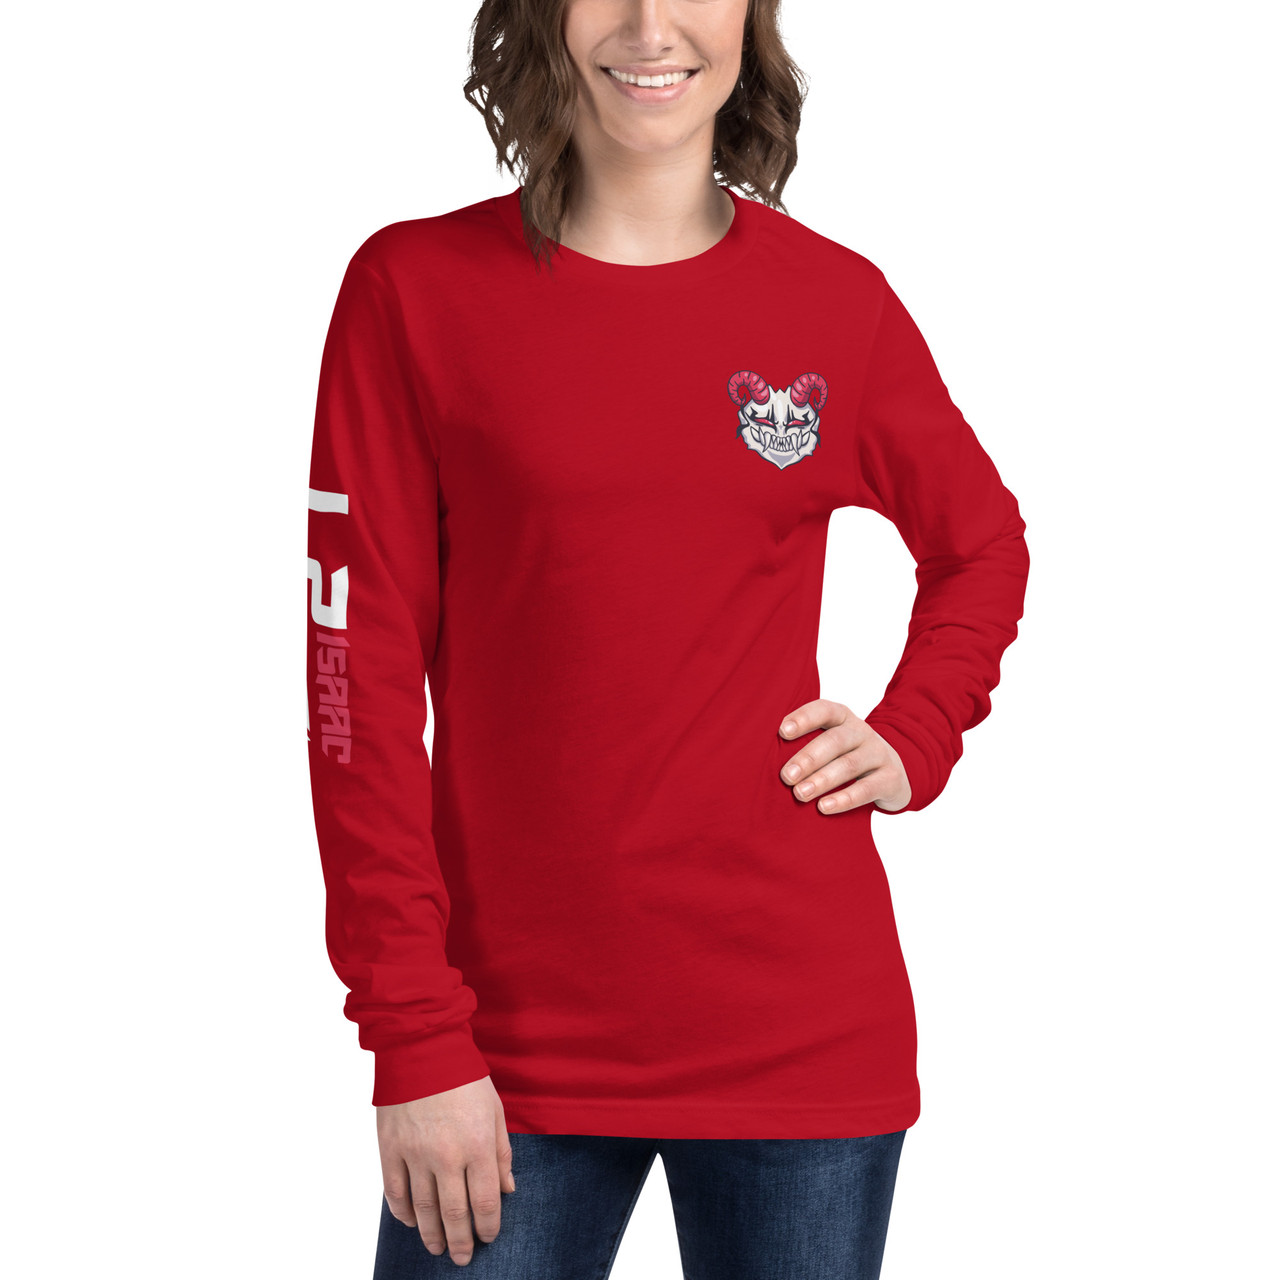 Womens lucky brand red and white long sleeve pullover t shirt s